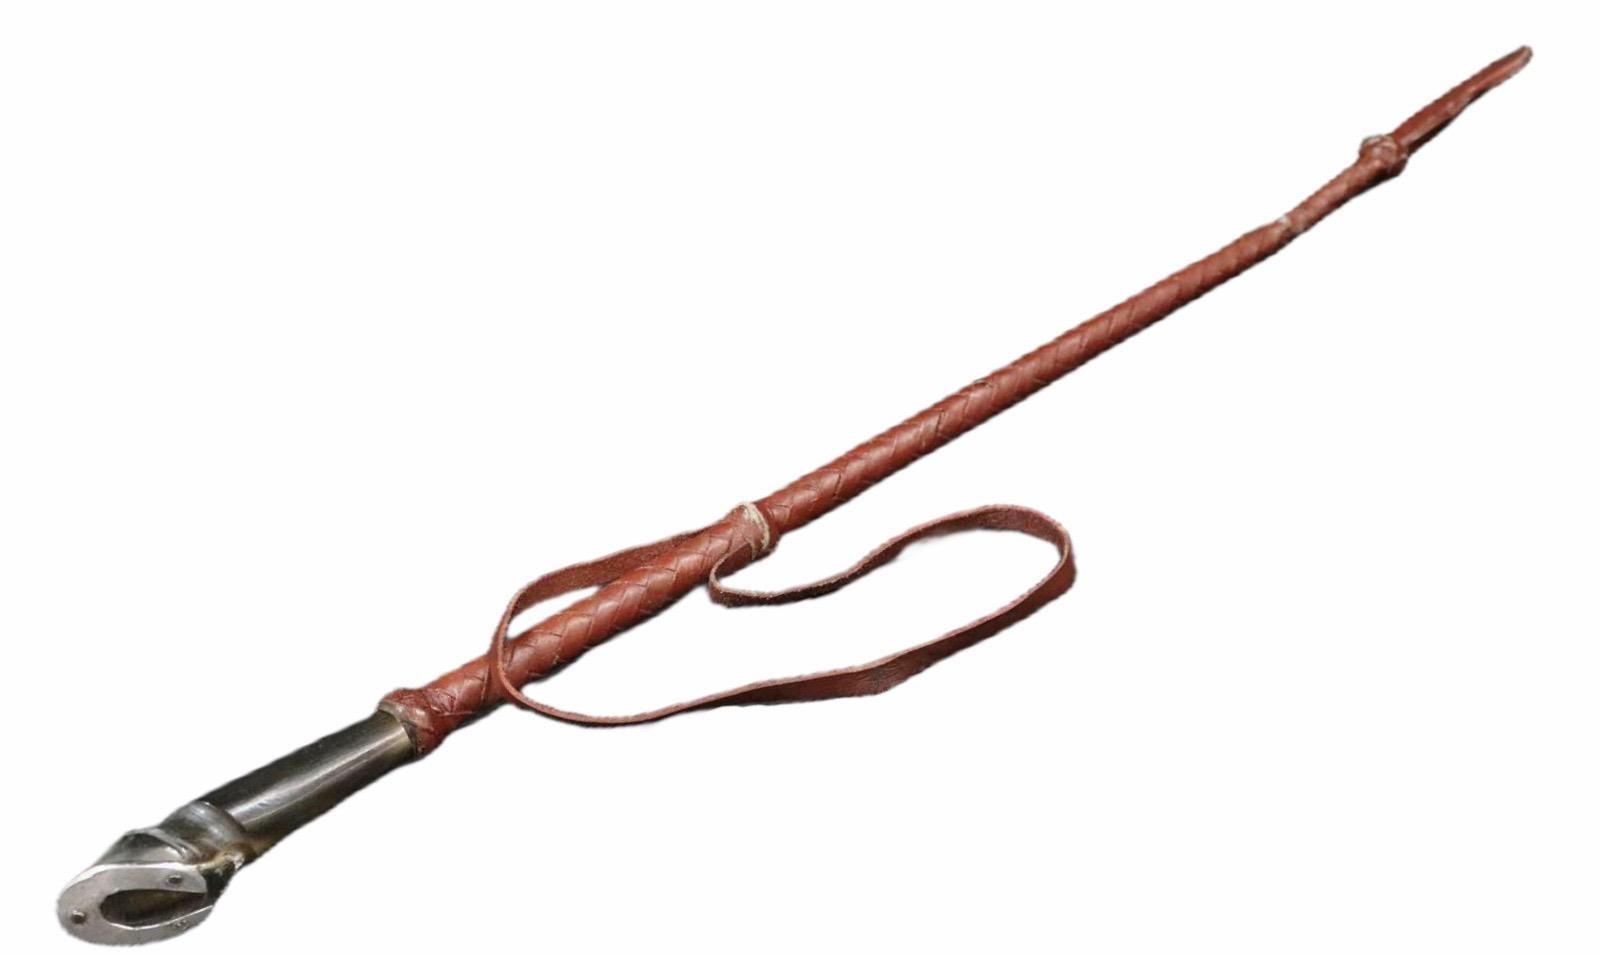 English riding crop wrapped in rope leather and whip stitched leather and hoof horn handle. Use lanes and a nail at the horseshoe missing. A used item but still in nice condition and usable.